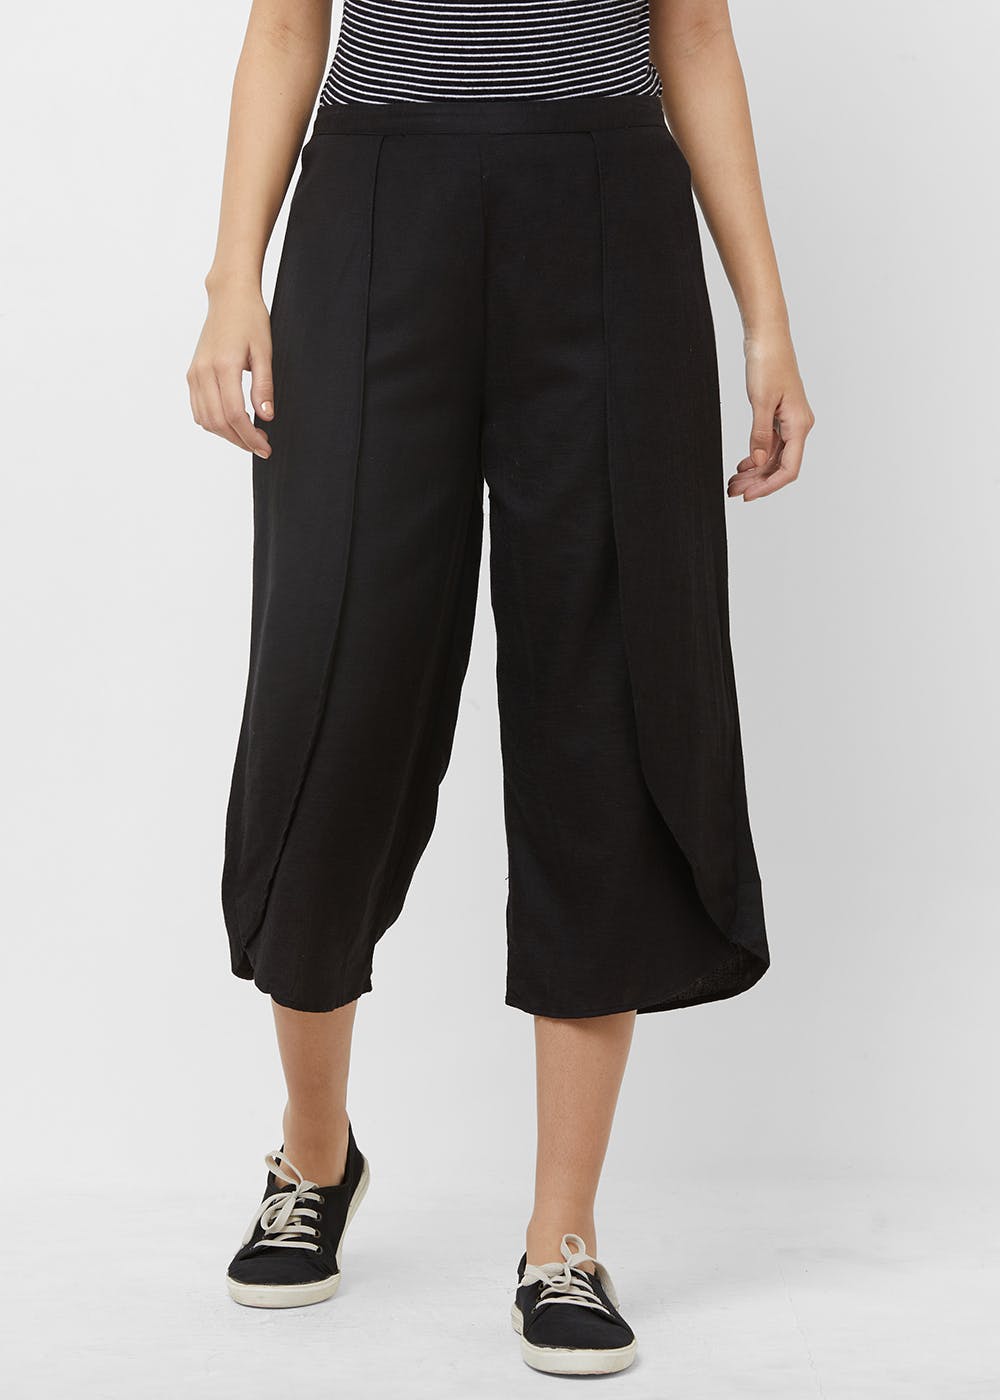 Get Solid Overlap Detail Culottes at ₹ 490 | LBB Shop